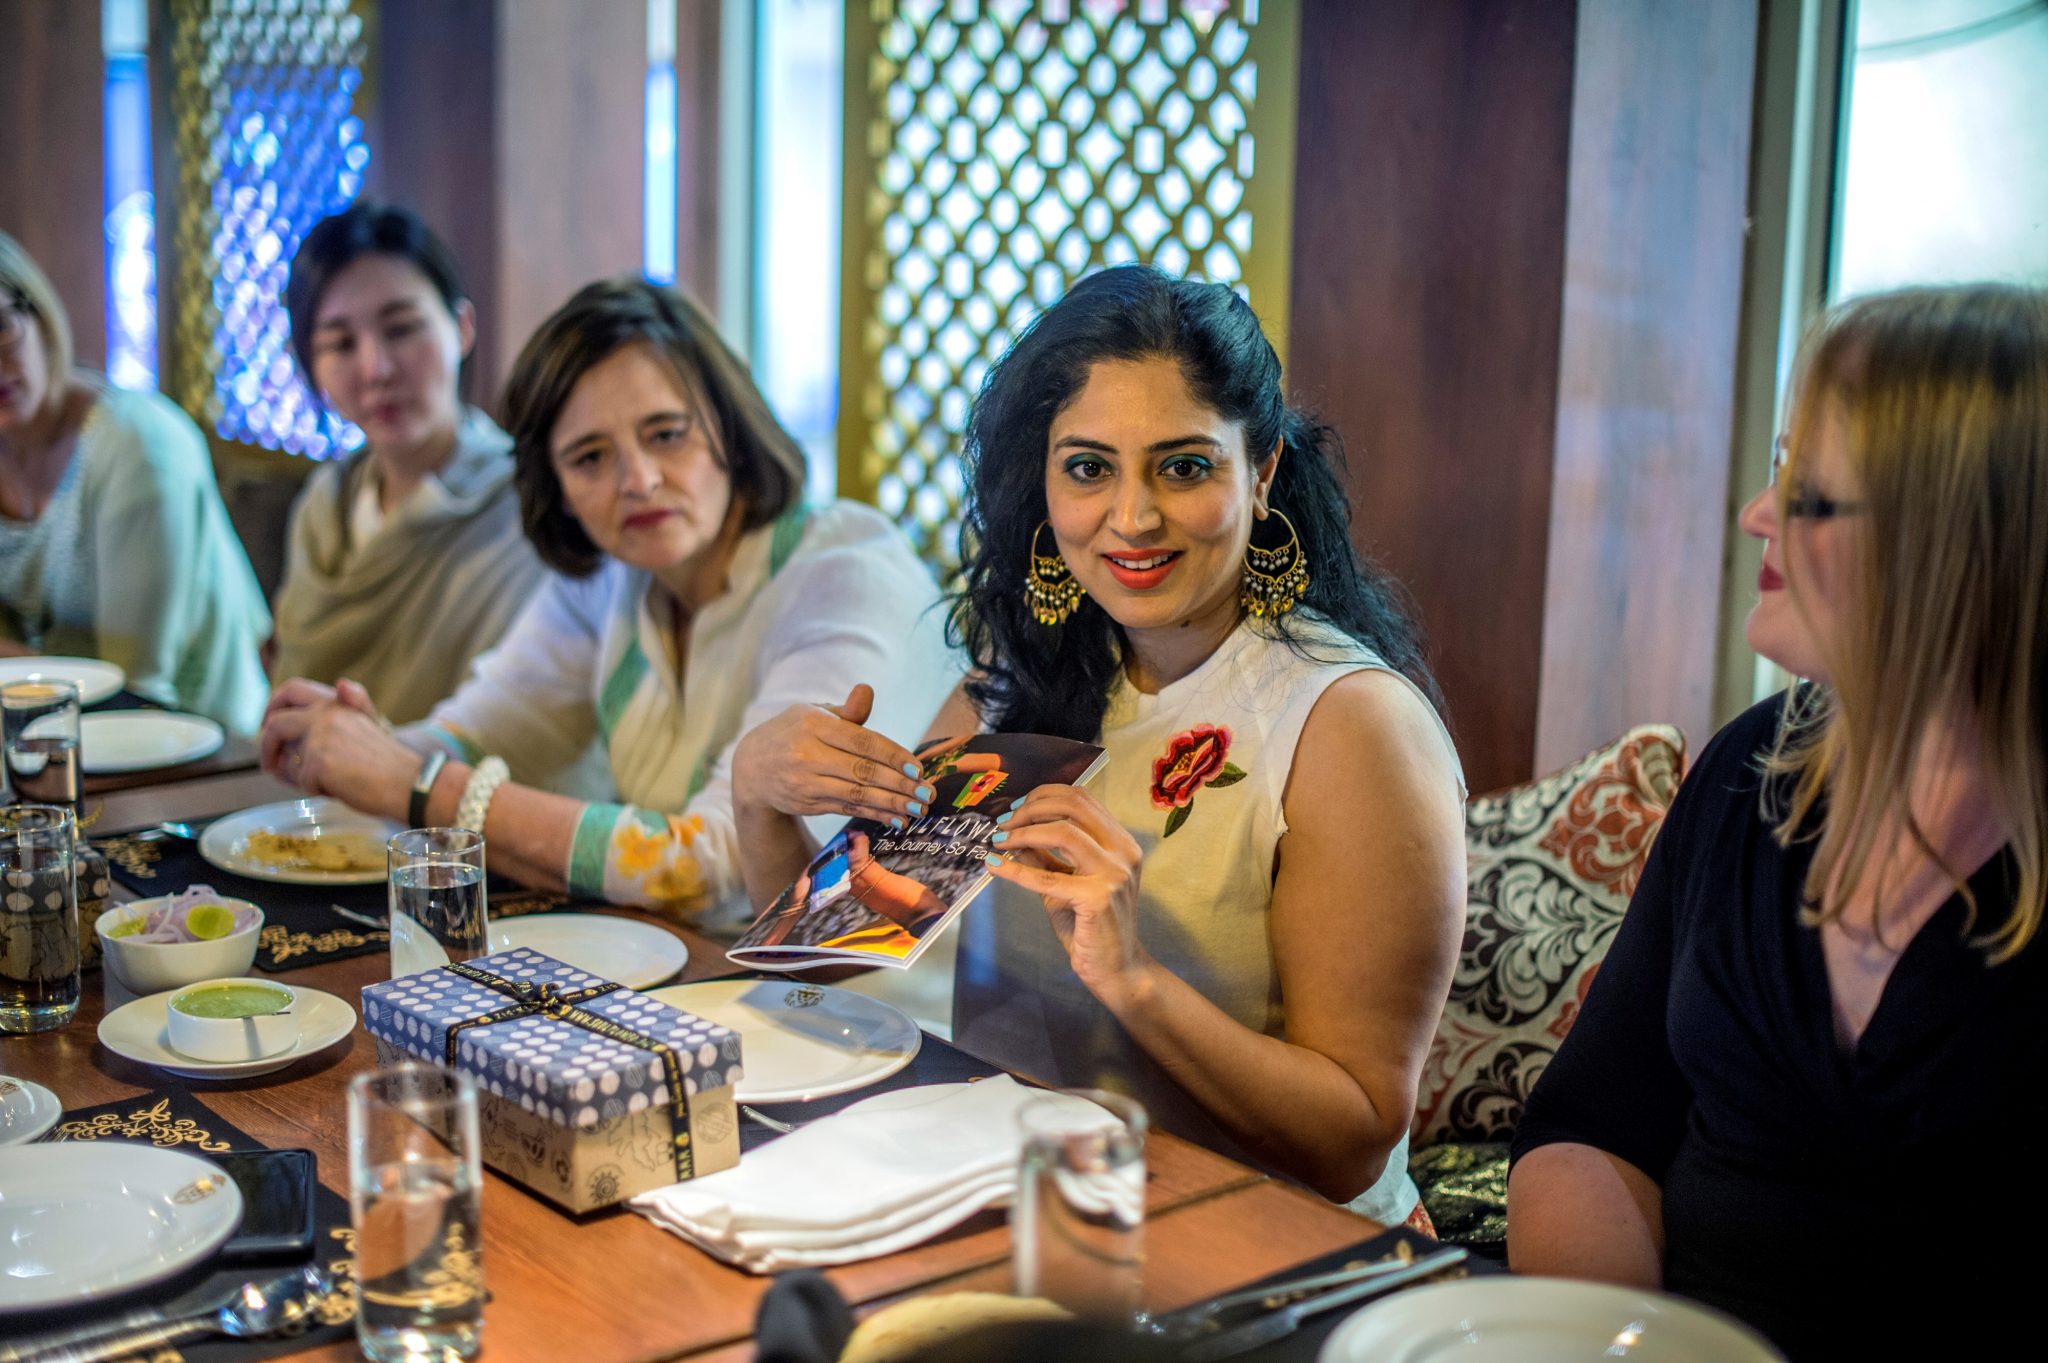 A woman entrepreneur in India speaks to a table of women